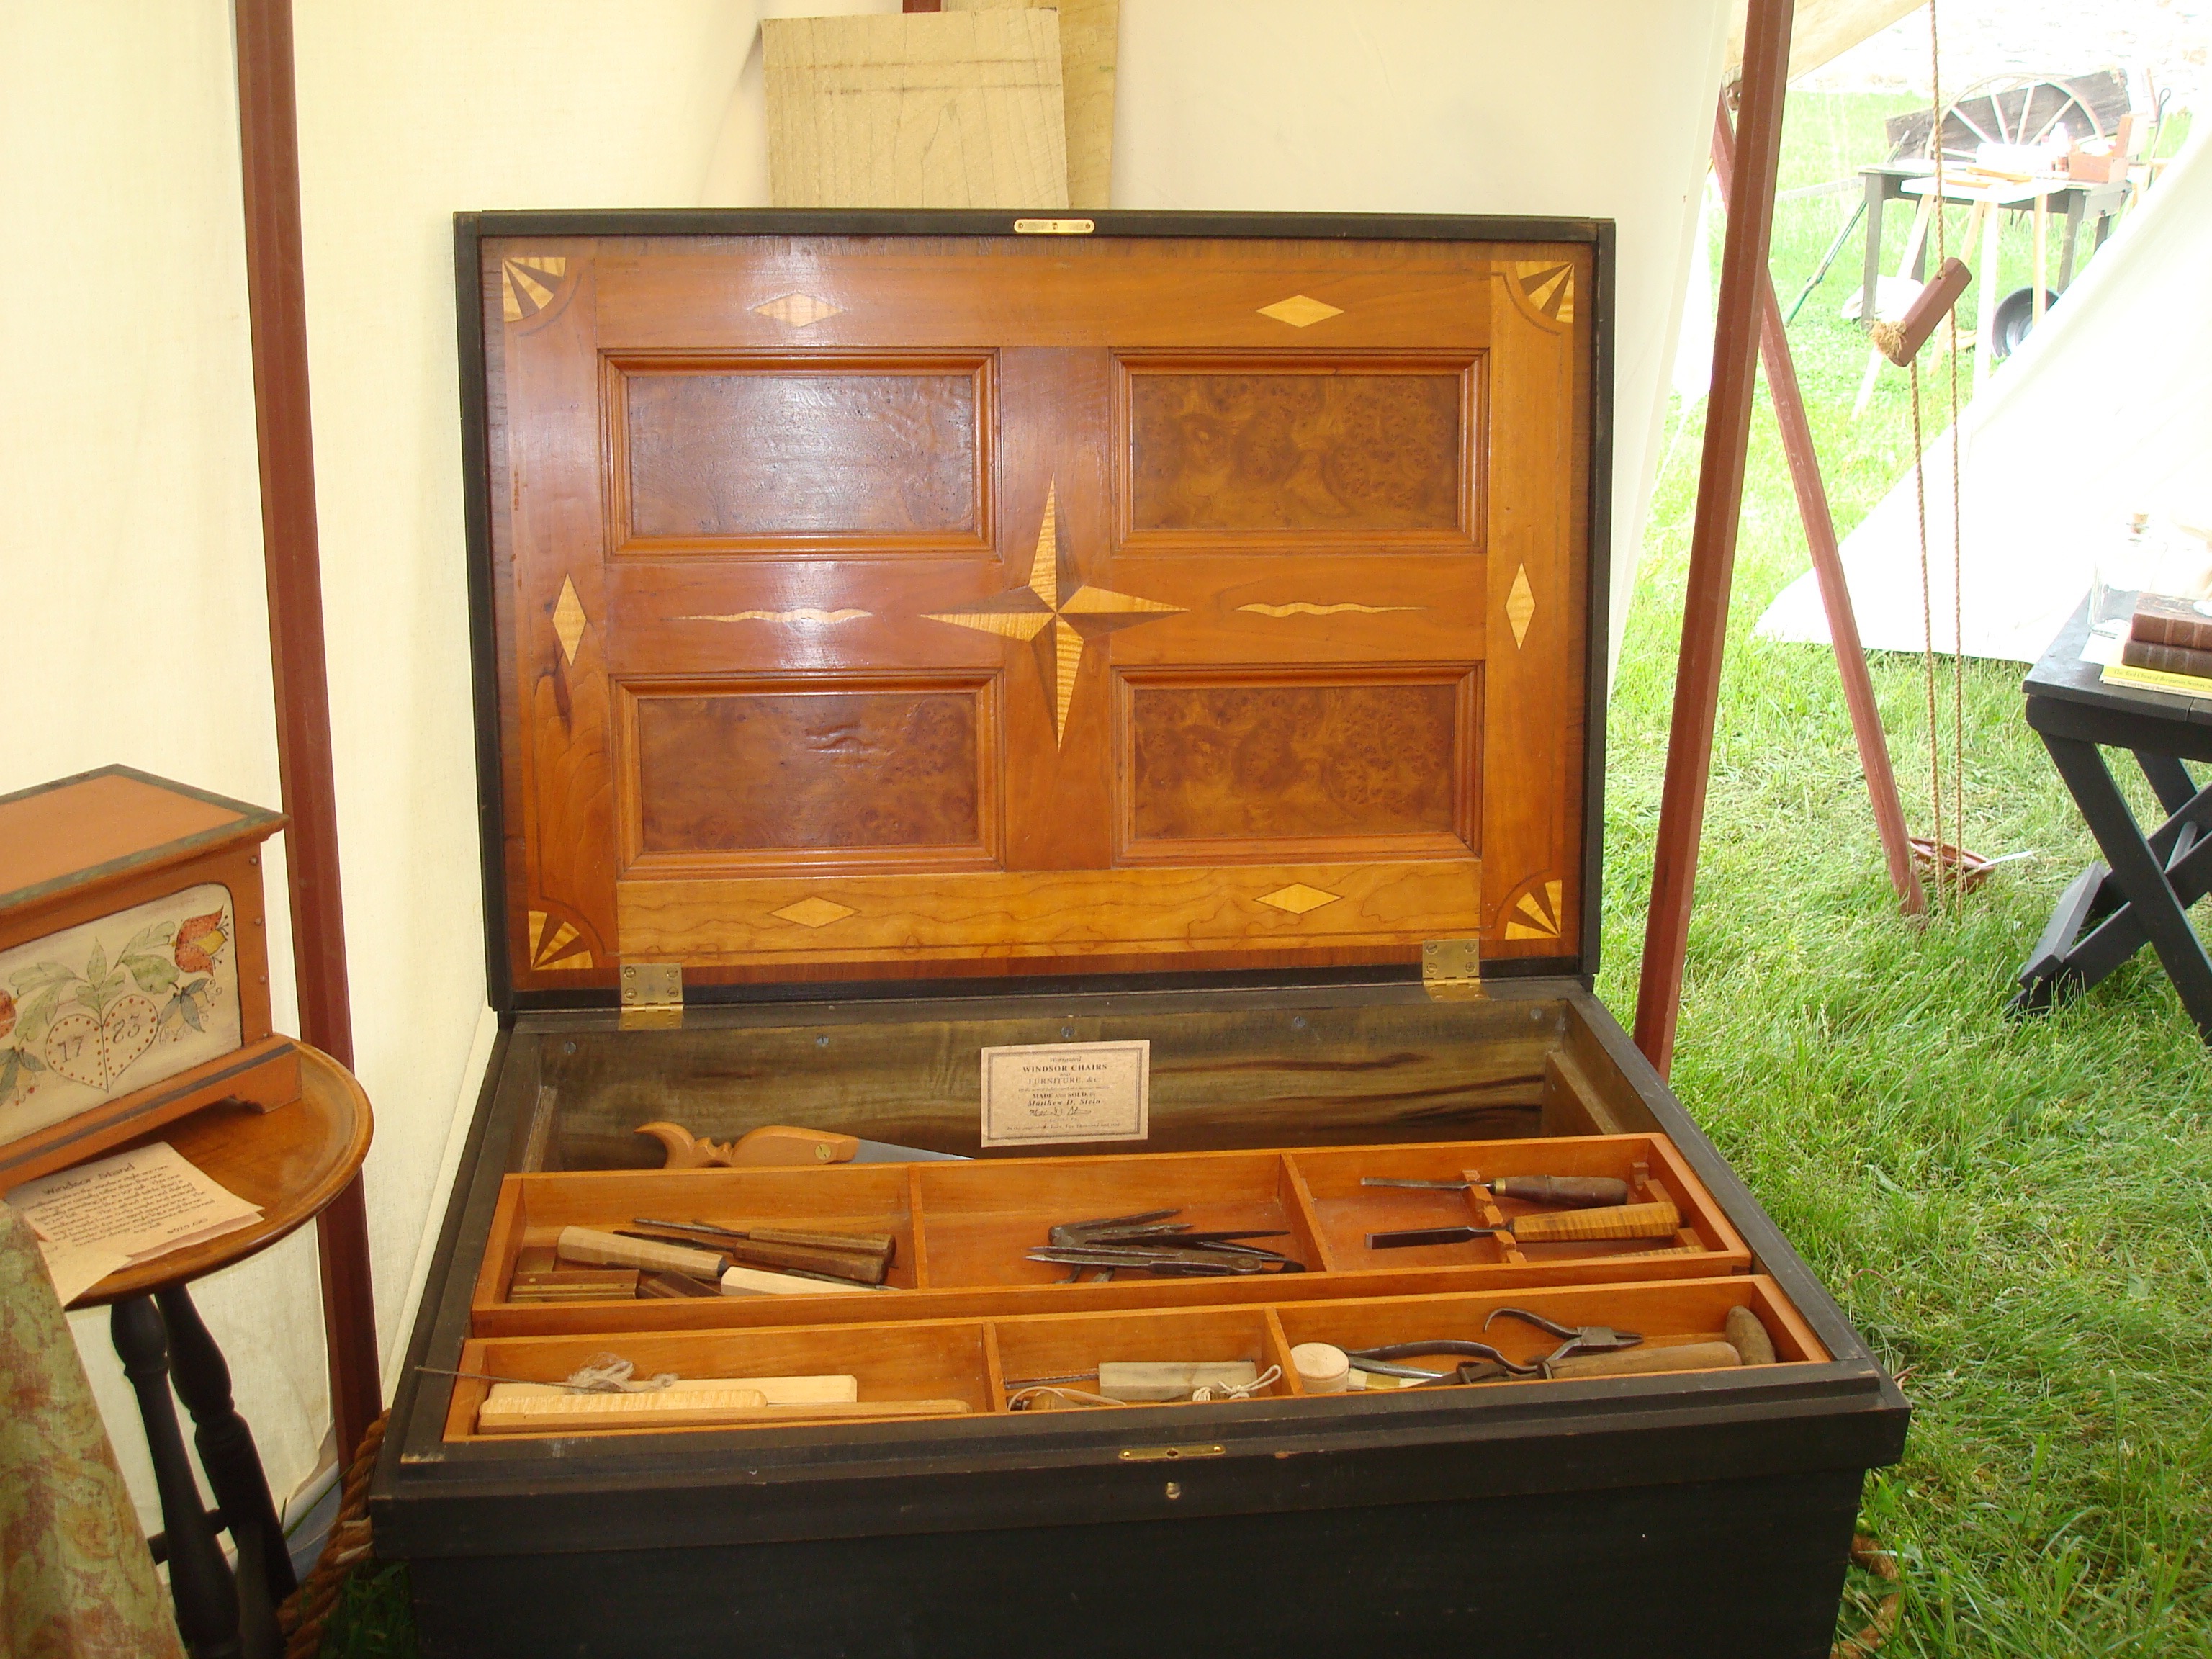 My personal Tool Box modeled after several 18th century tool boxes